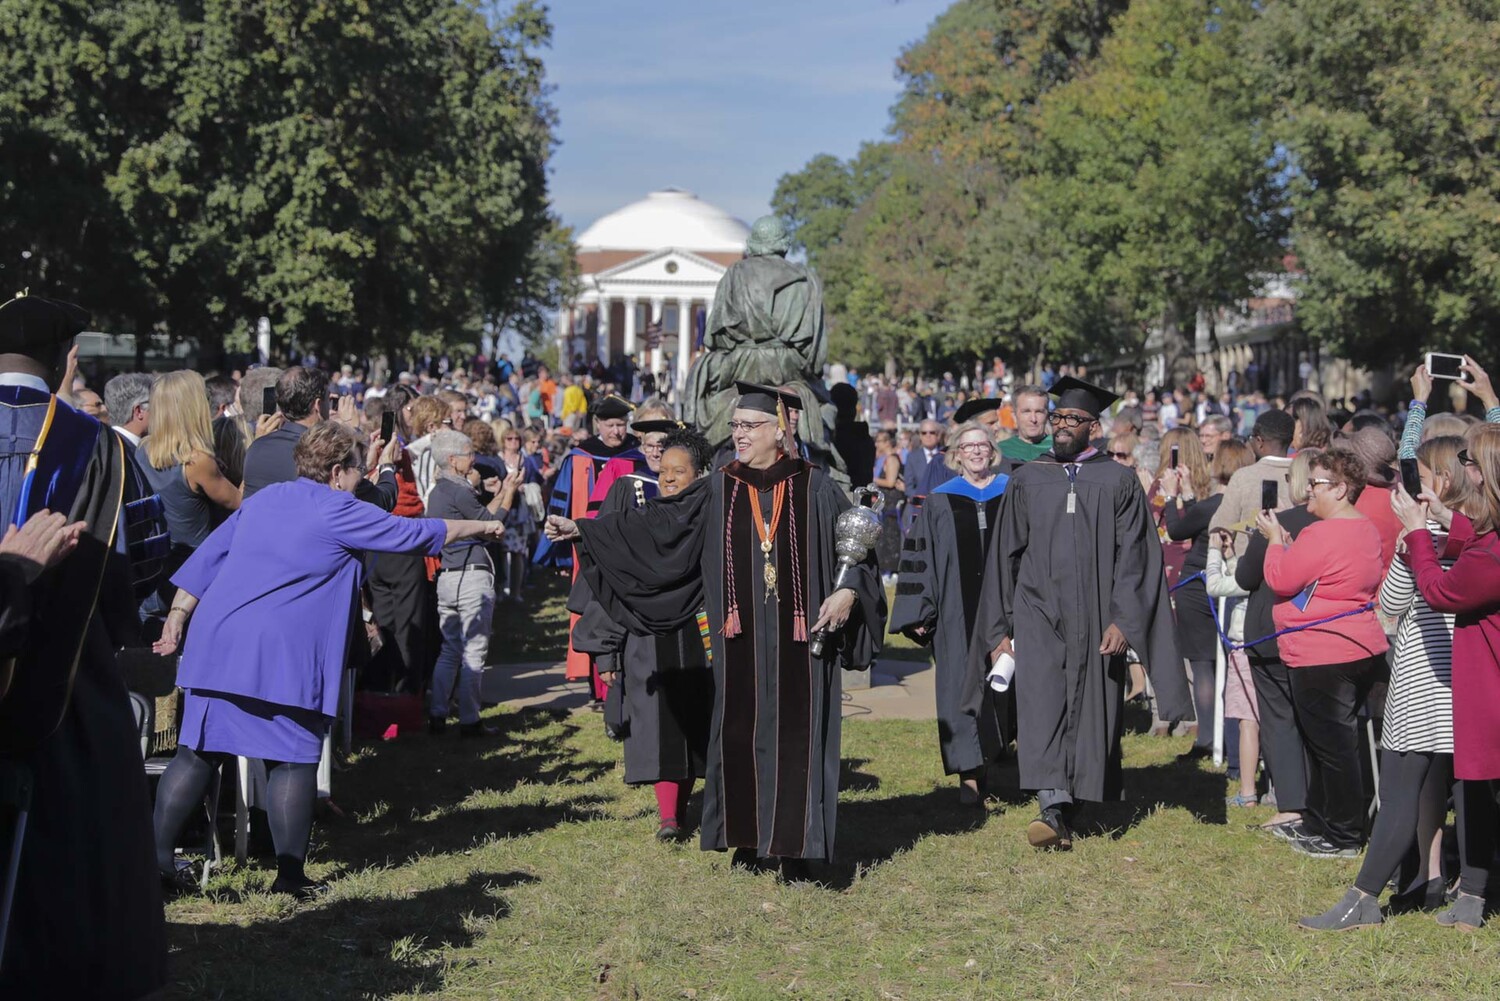 During Jim Ryan's Inauguration procession, Teresa A. Sullivan, former UVA President offered a first-bump to Professor Gweneth West, who serves as UVA’s grand marshal for Final Exercises and other seminal University events.